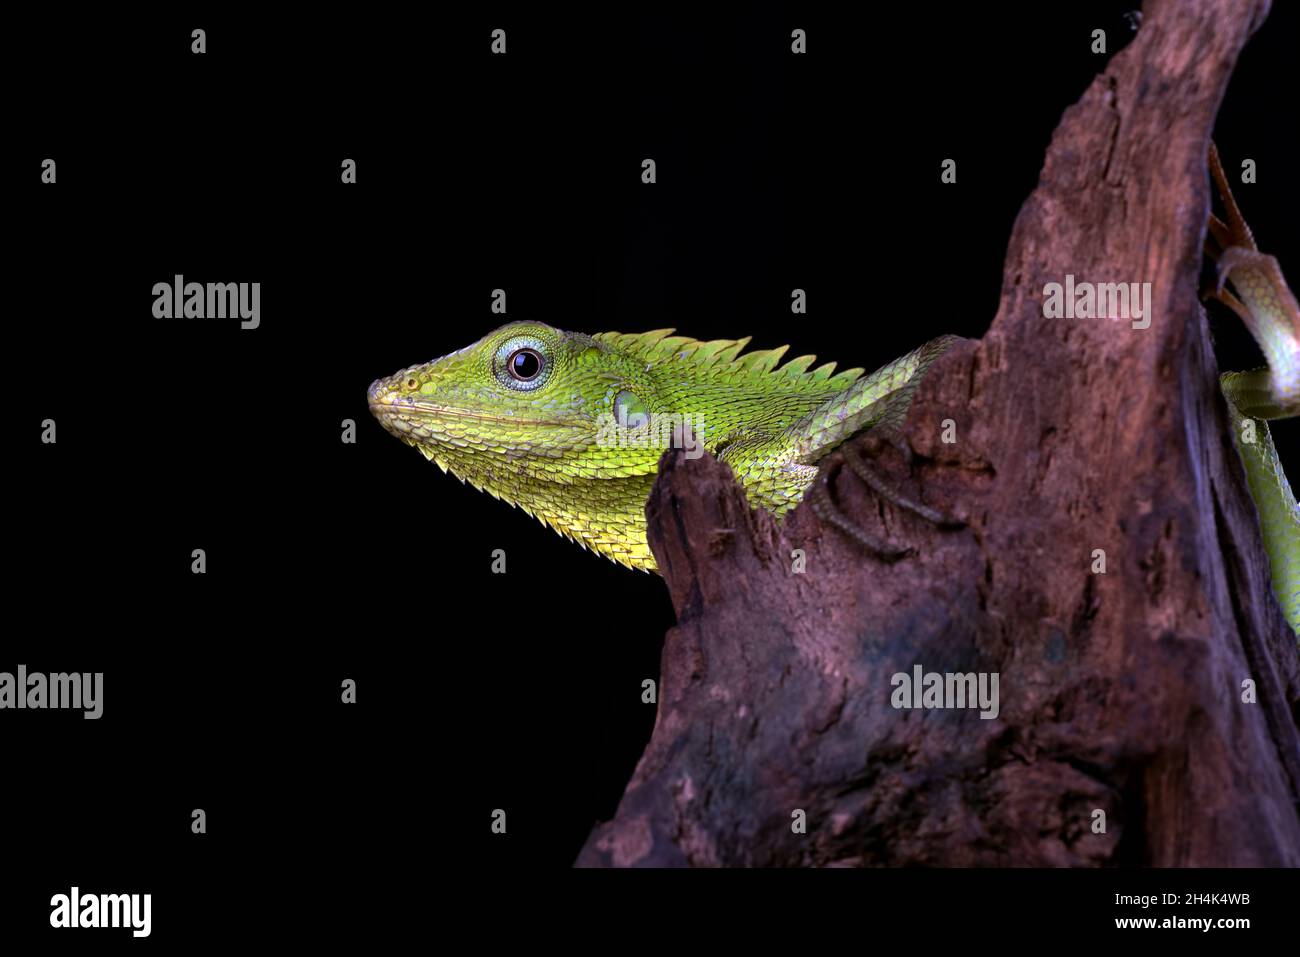 Close-up of a maned forest lizard against a black background, Indonesia Stock Photo